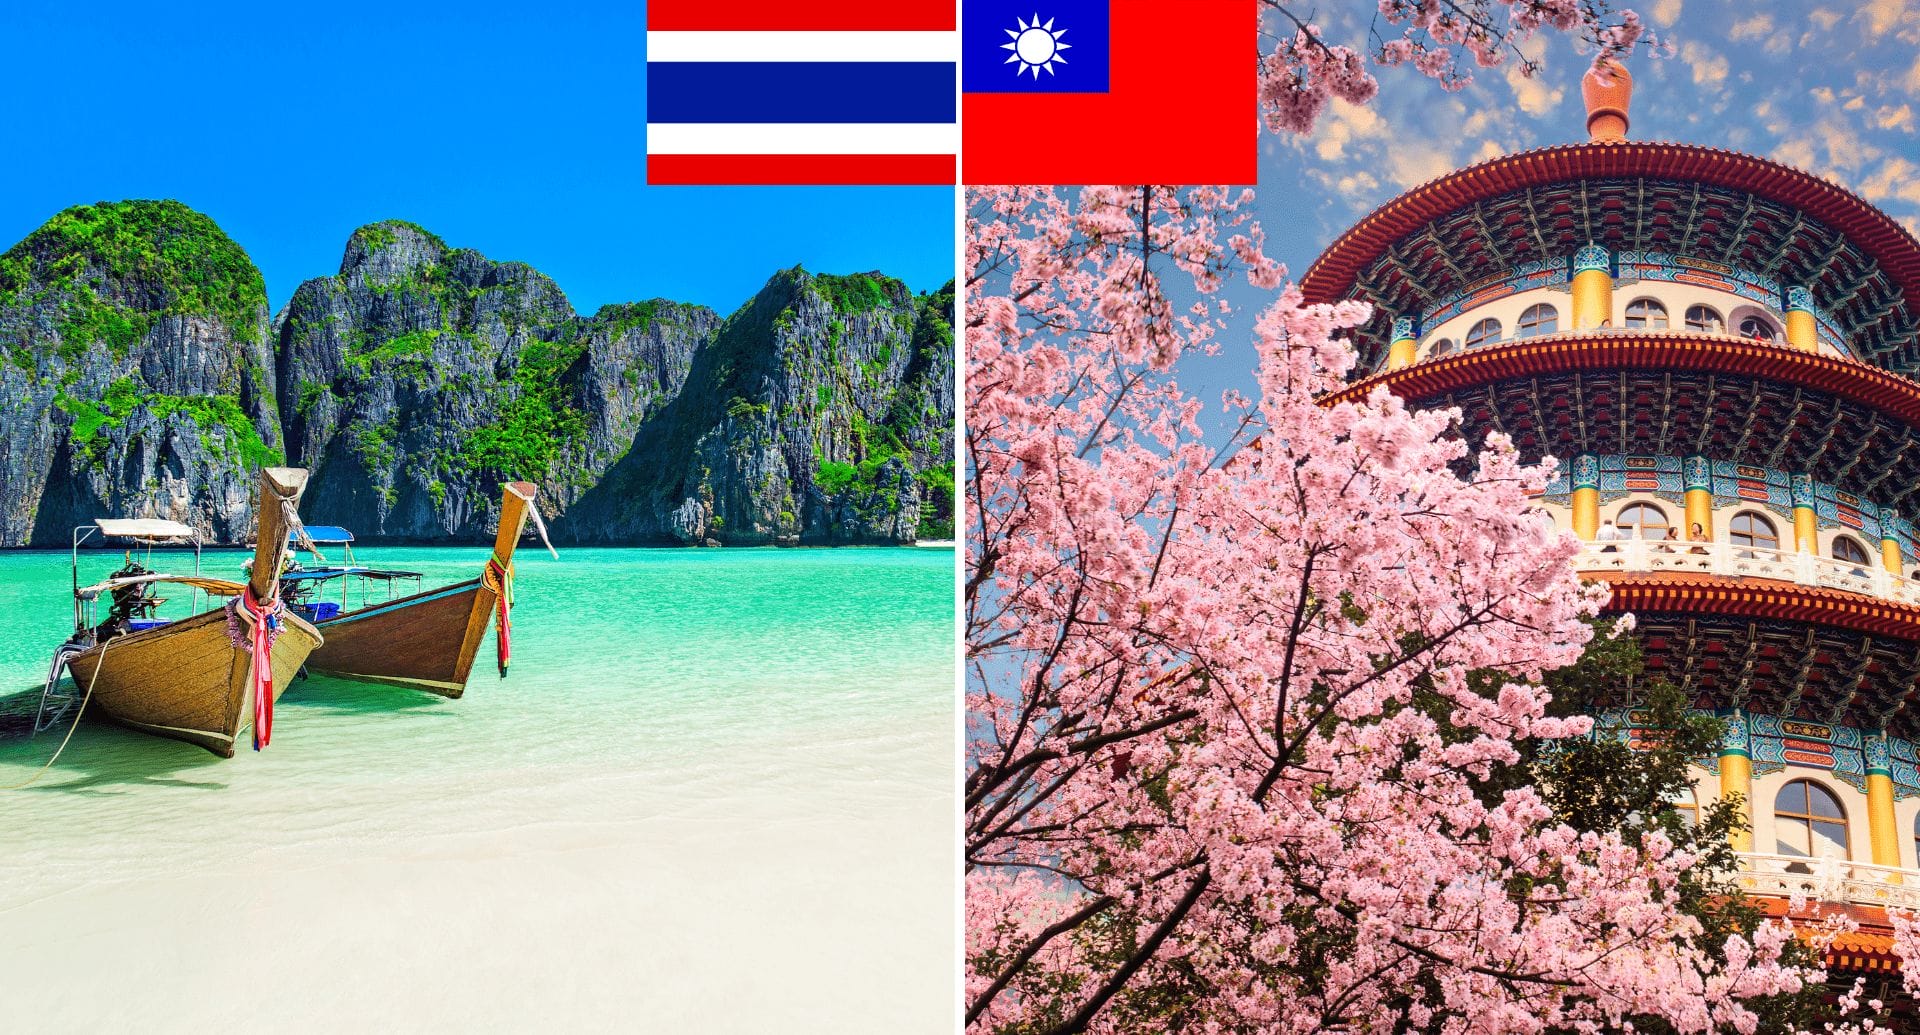 Thailand or Taiwan: which should you visit? And what's the difference between them?